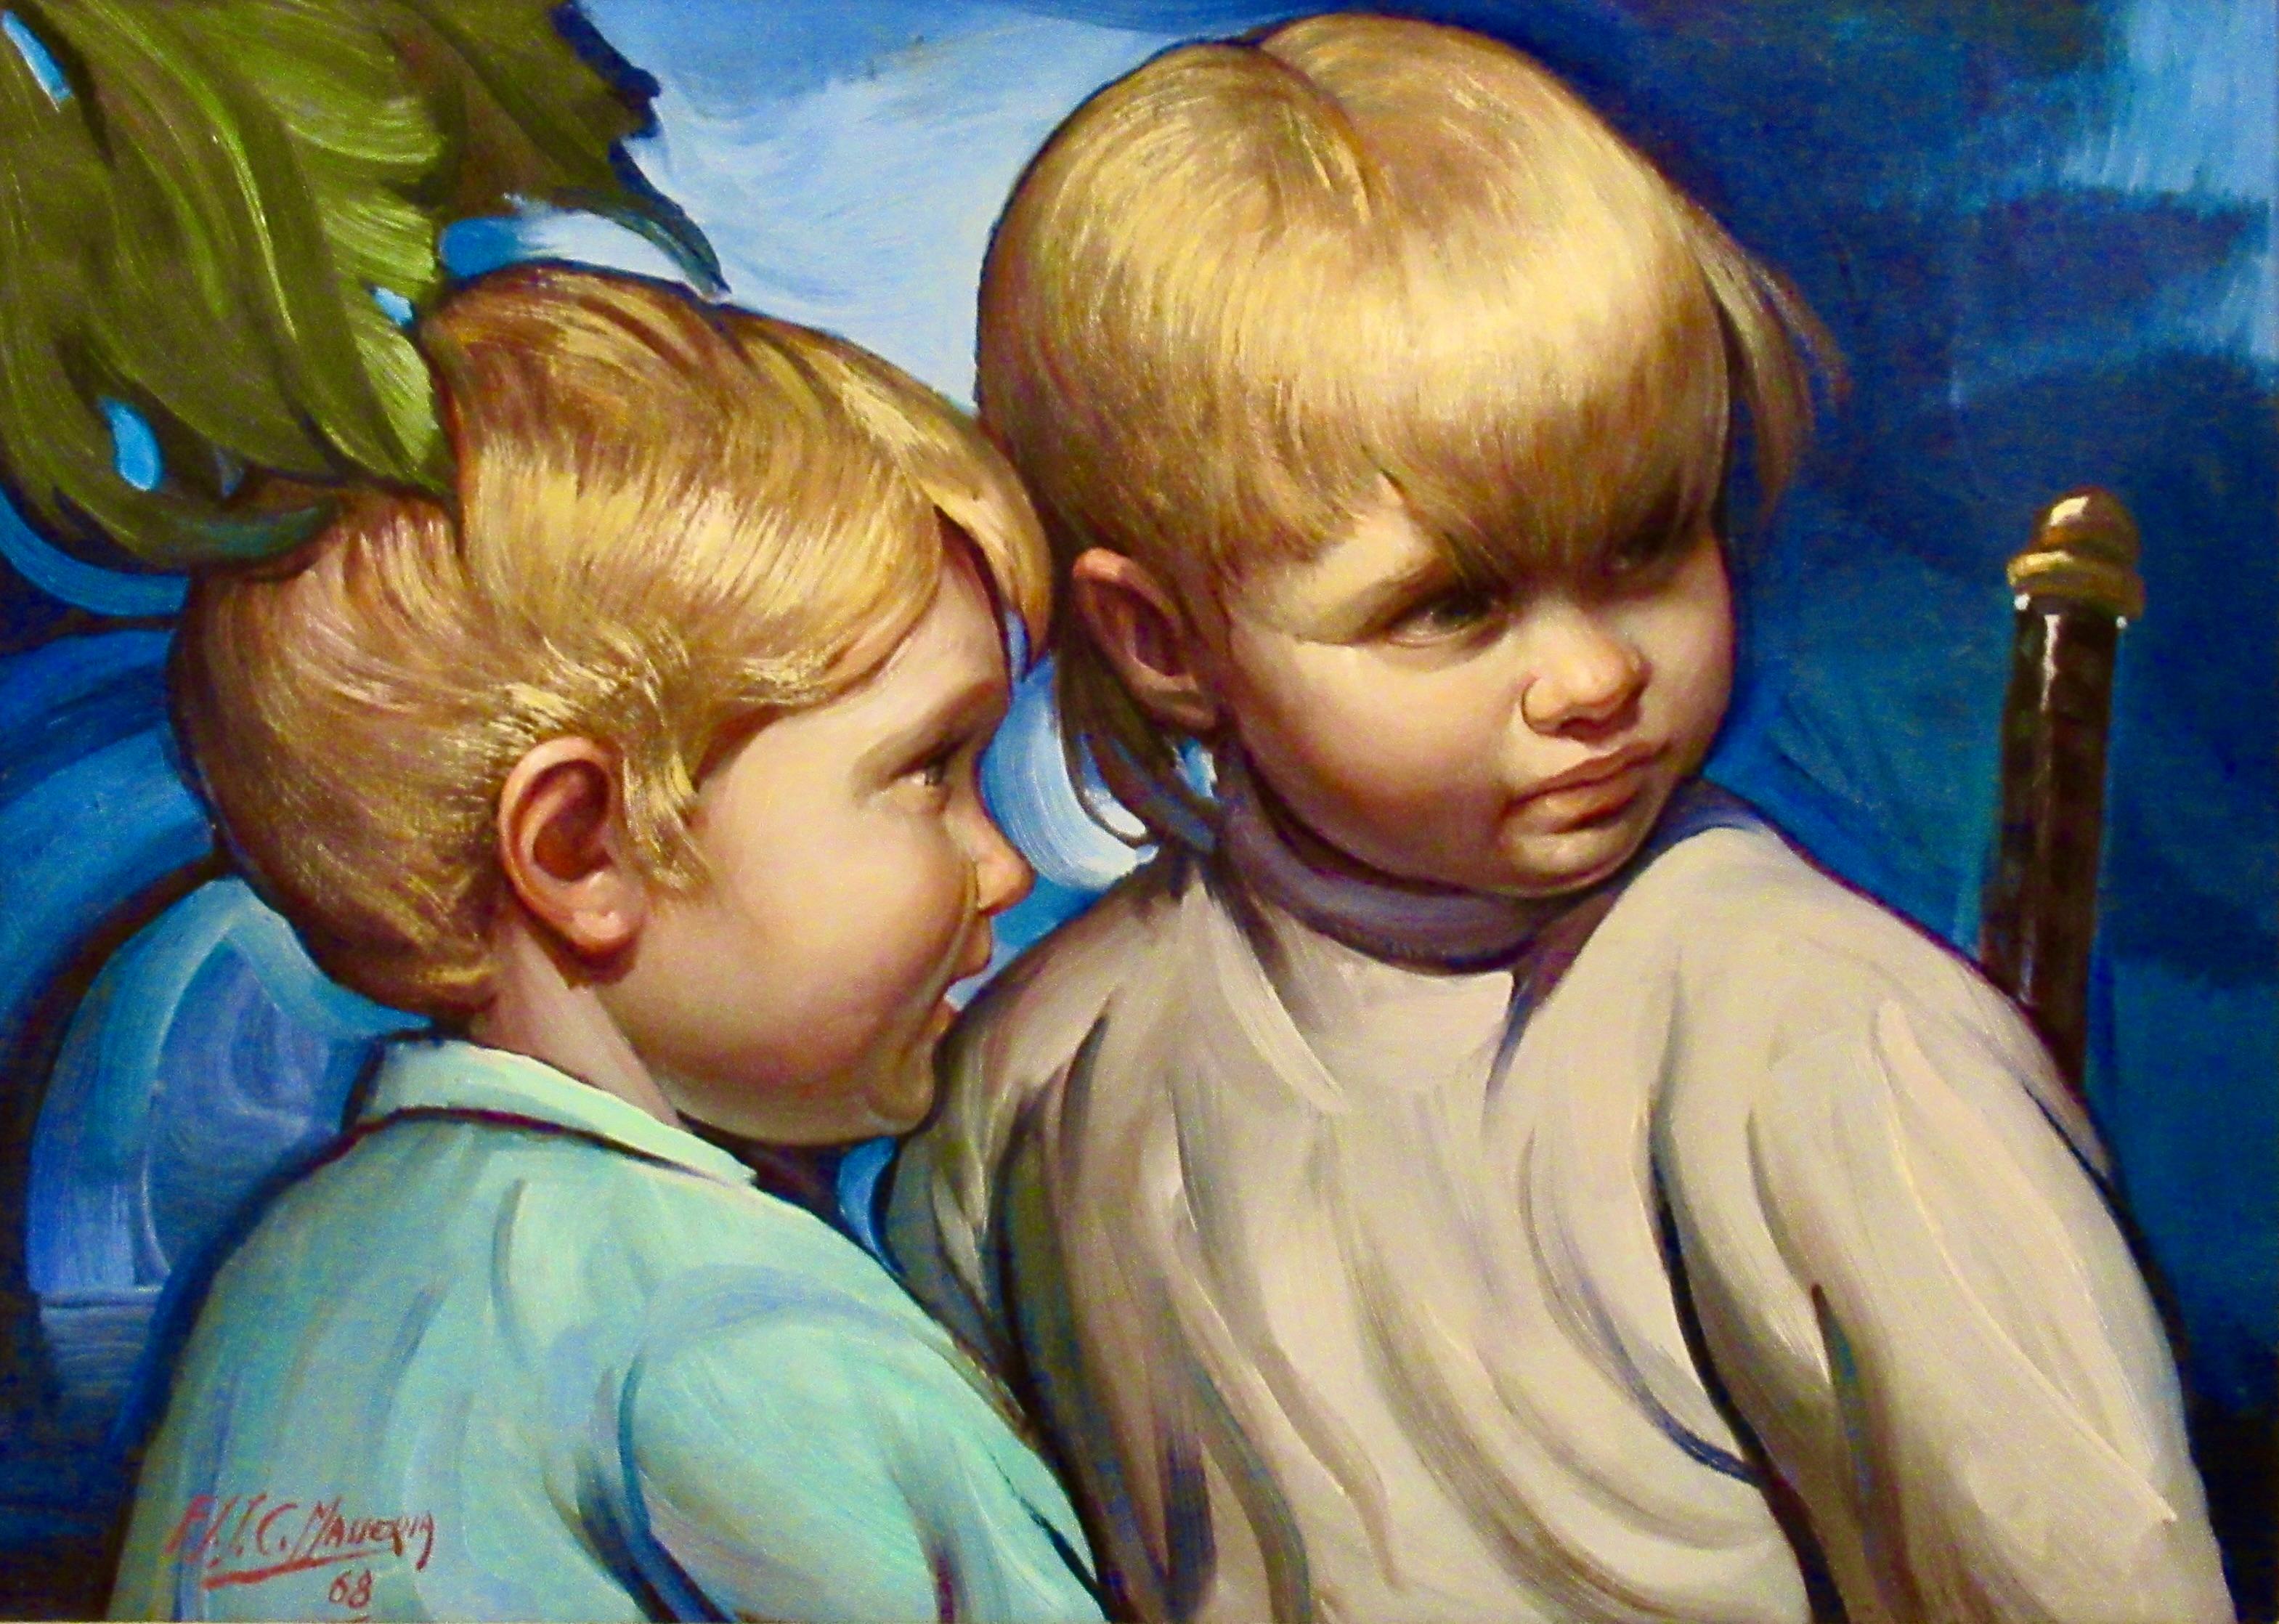 Sibling - Painting by Francisco Masseria